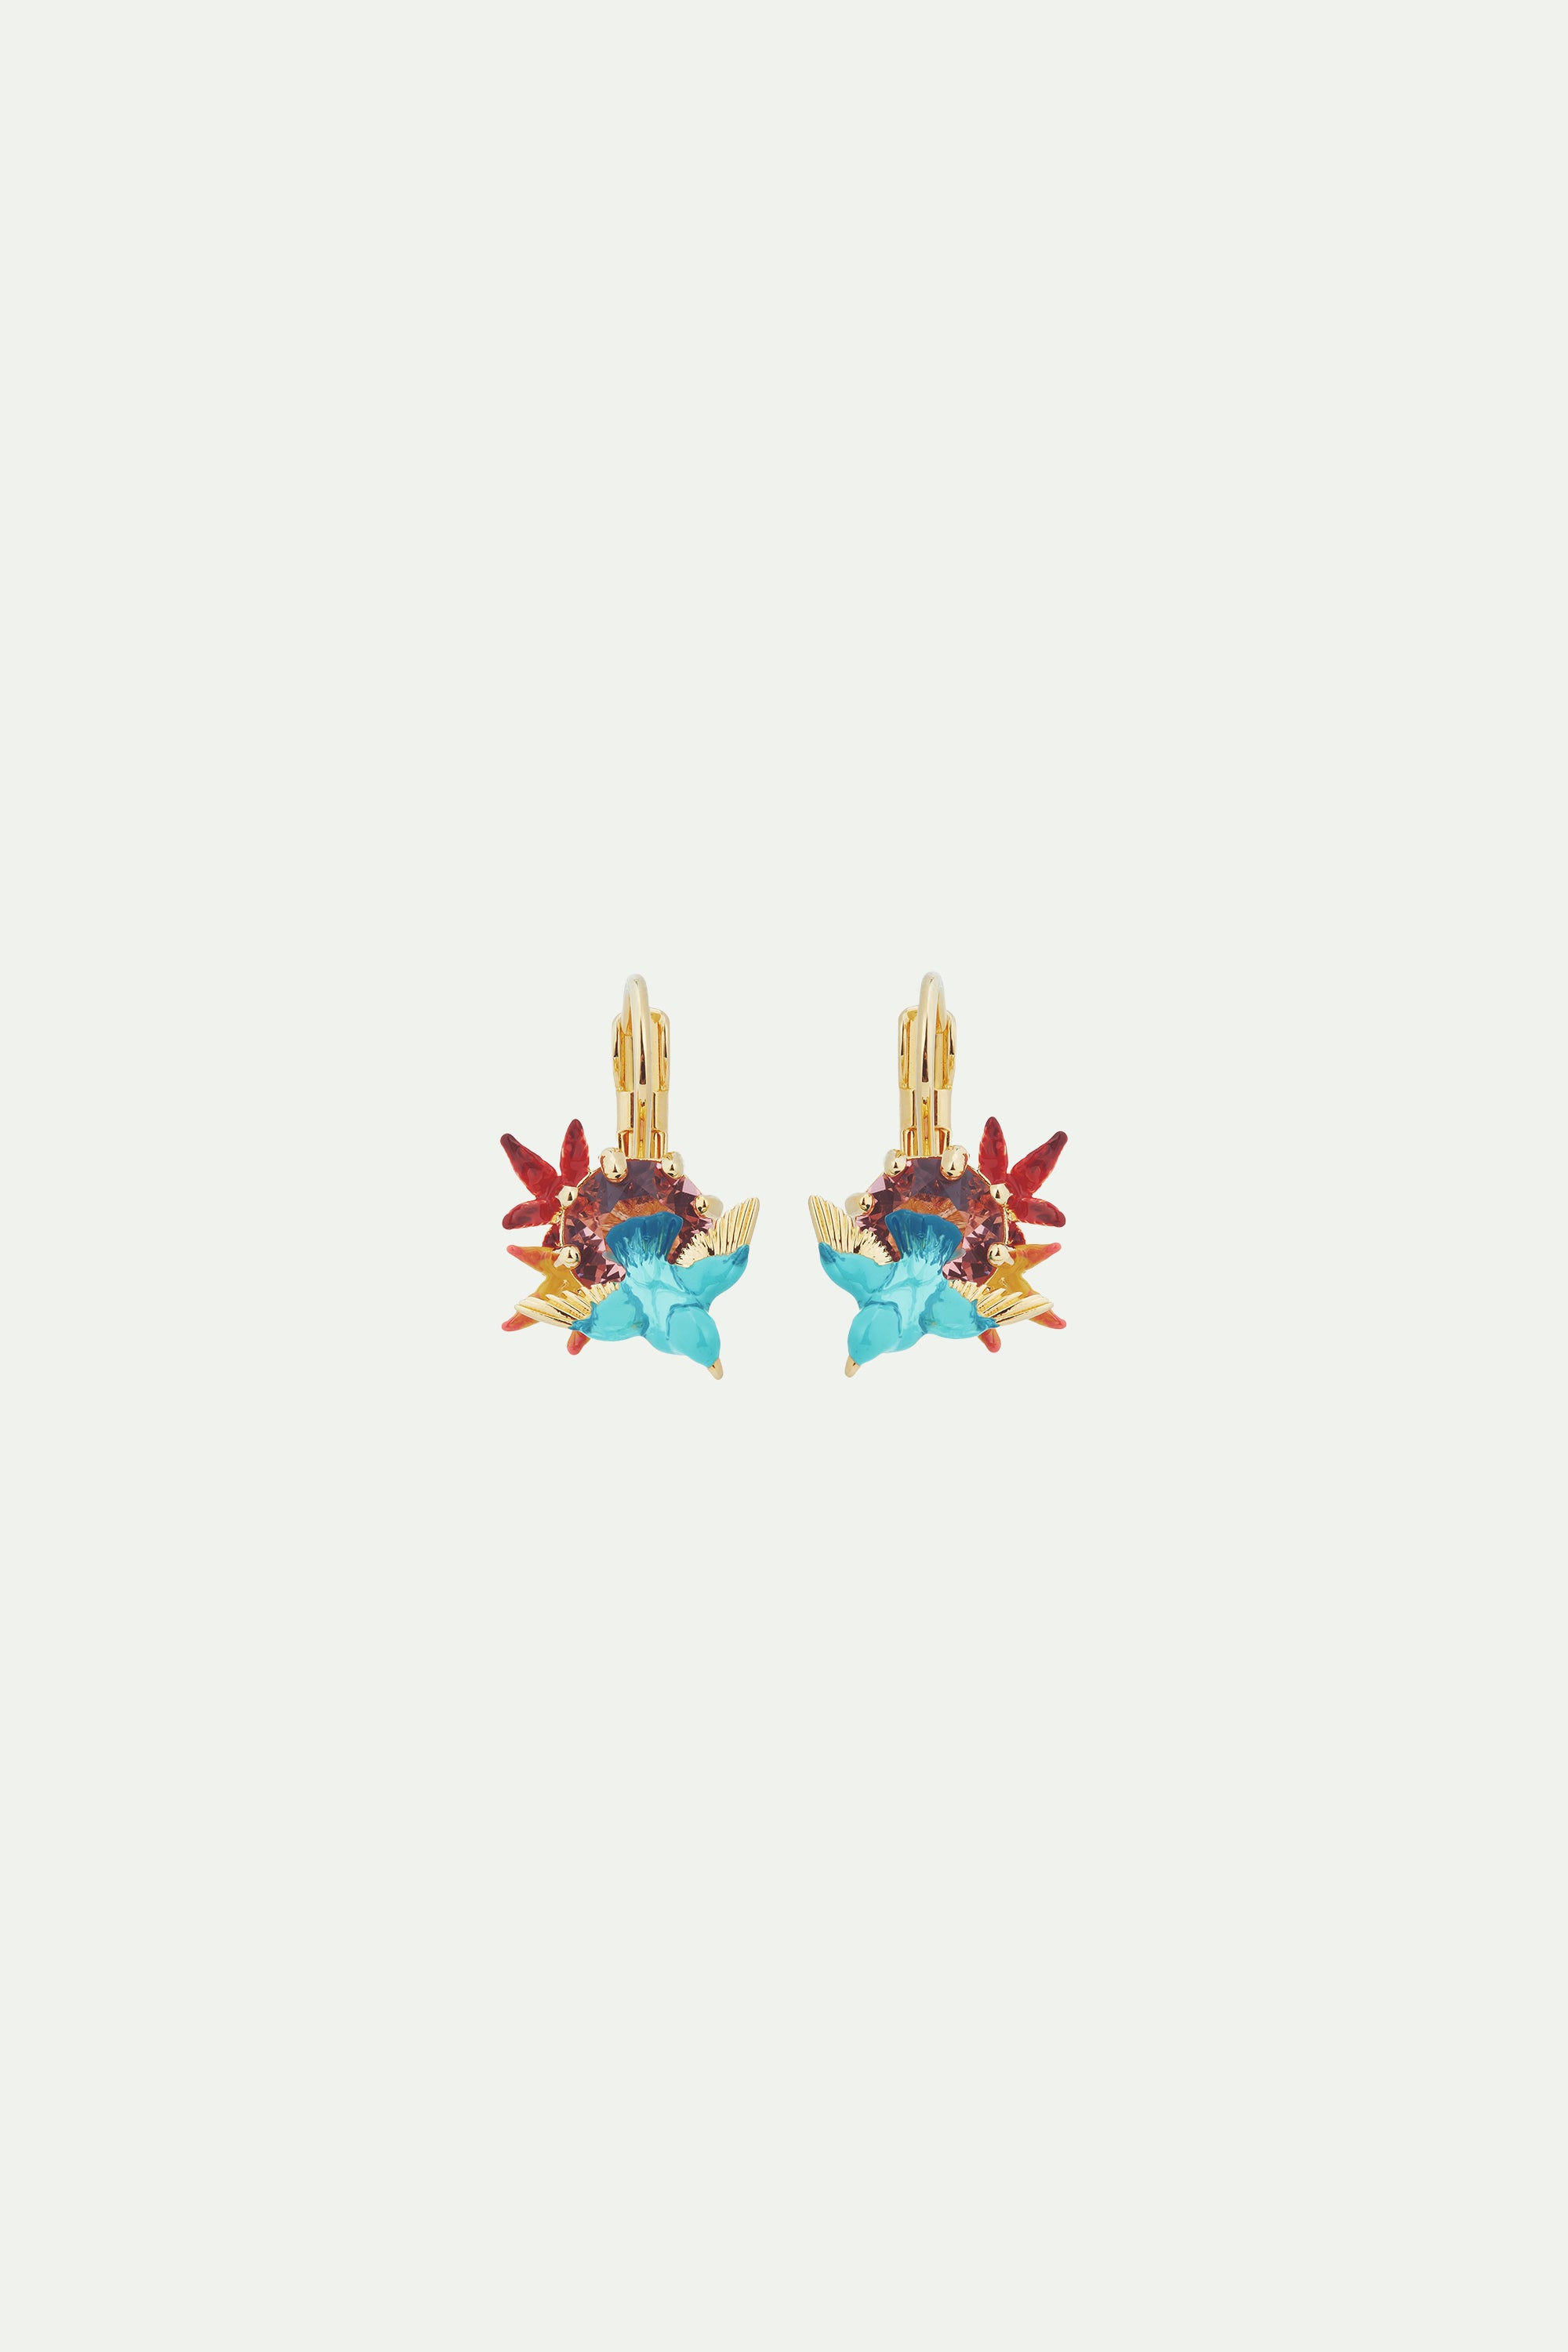 Kingfisher, maple leaf and round stone post earrings